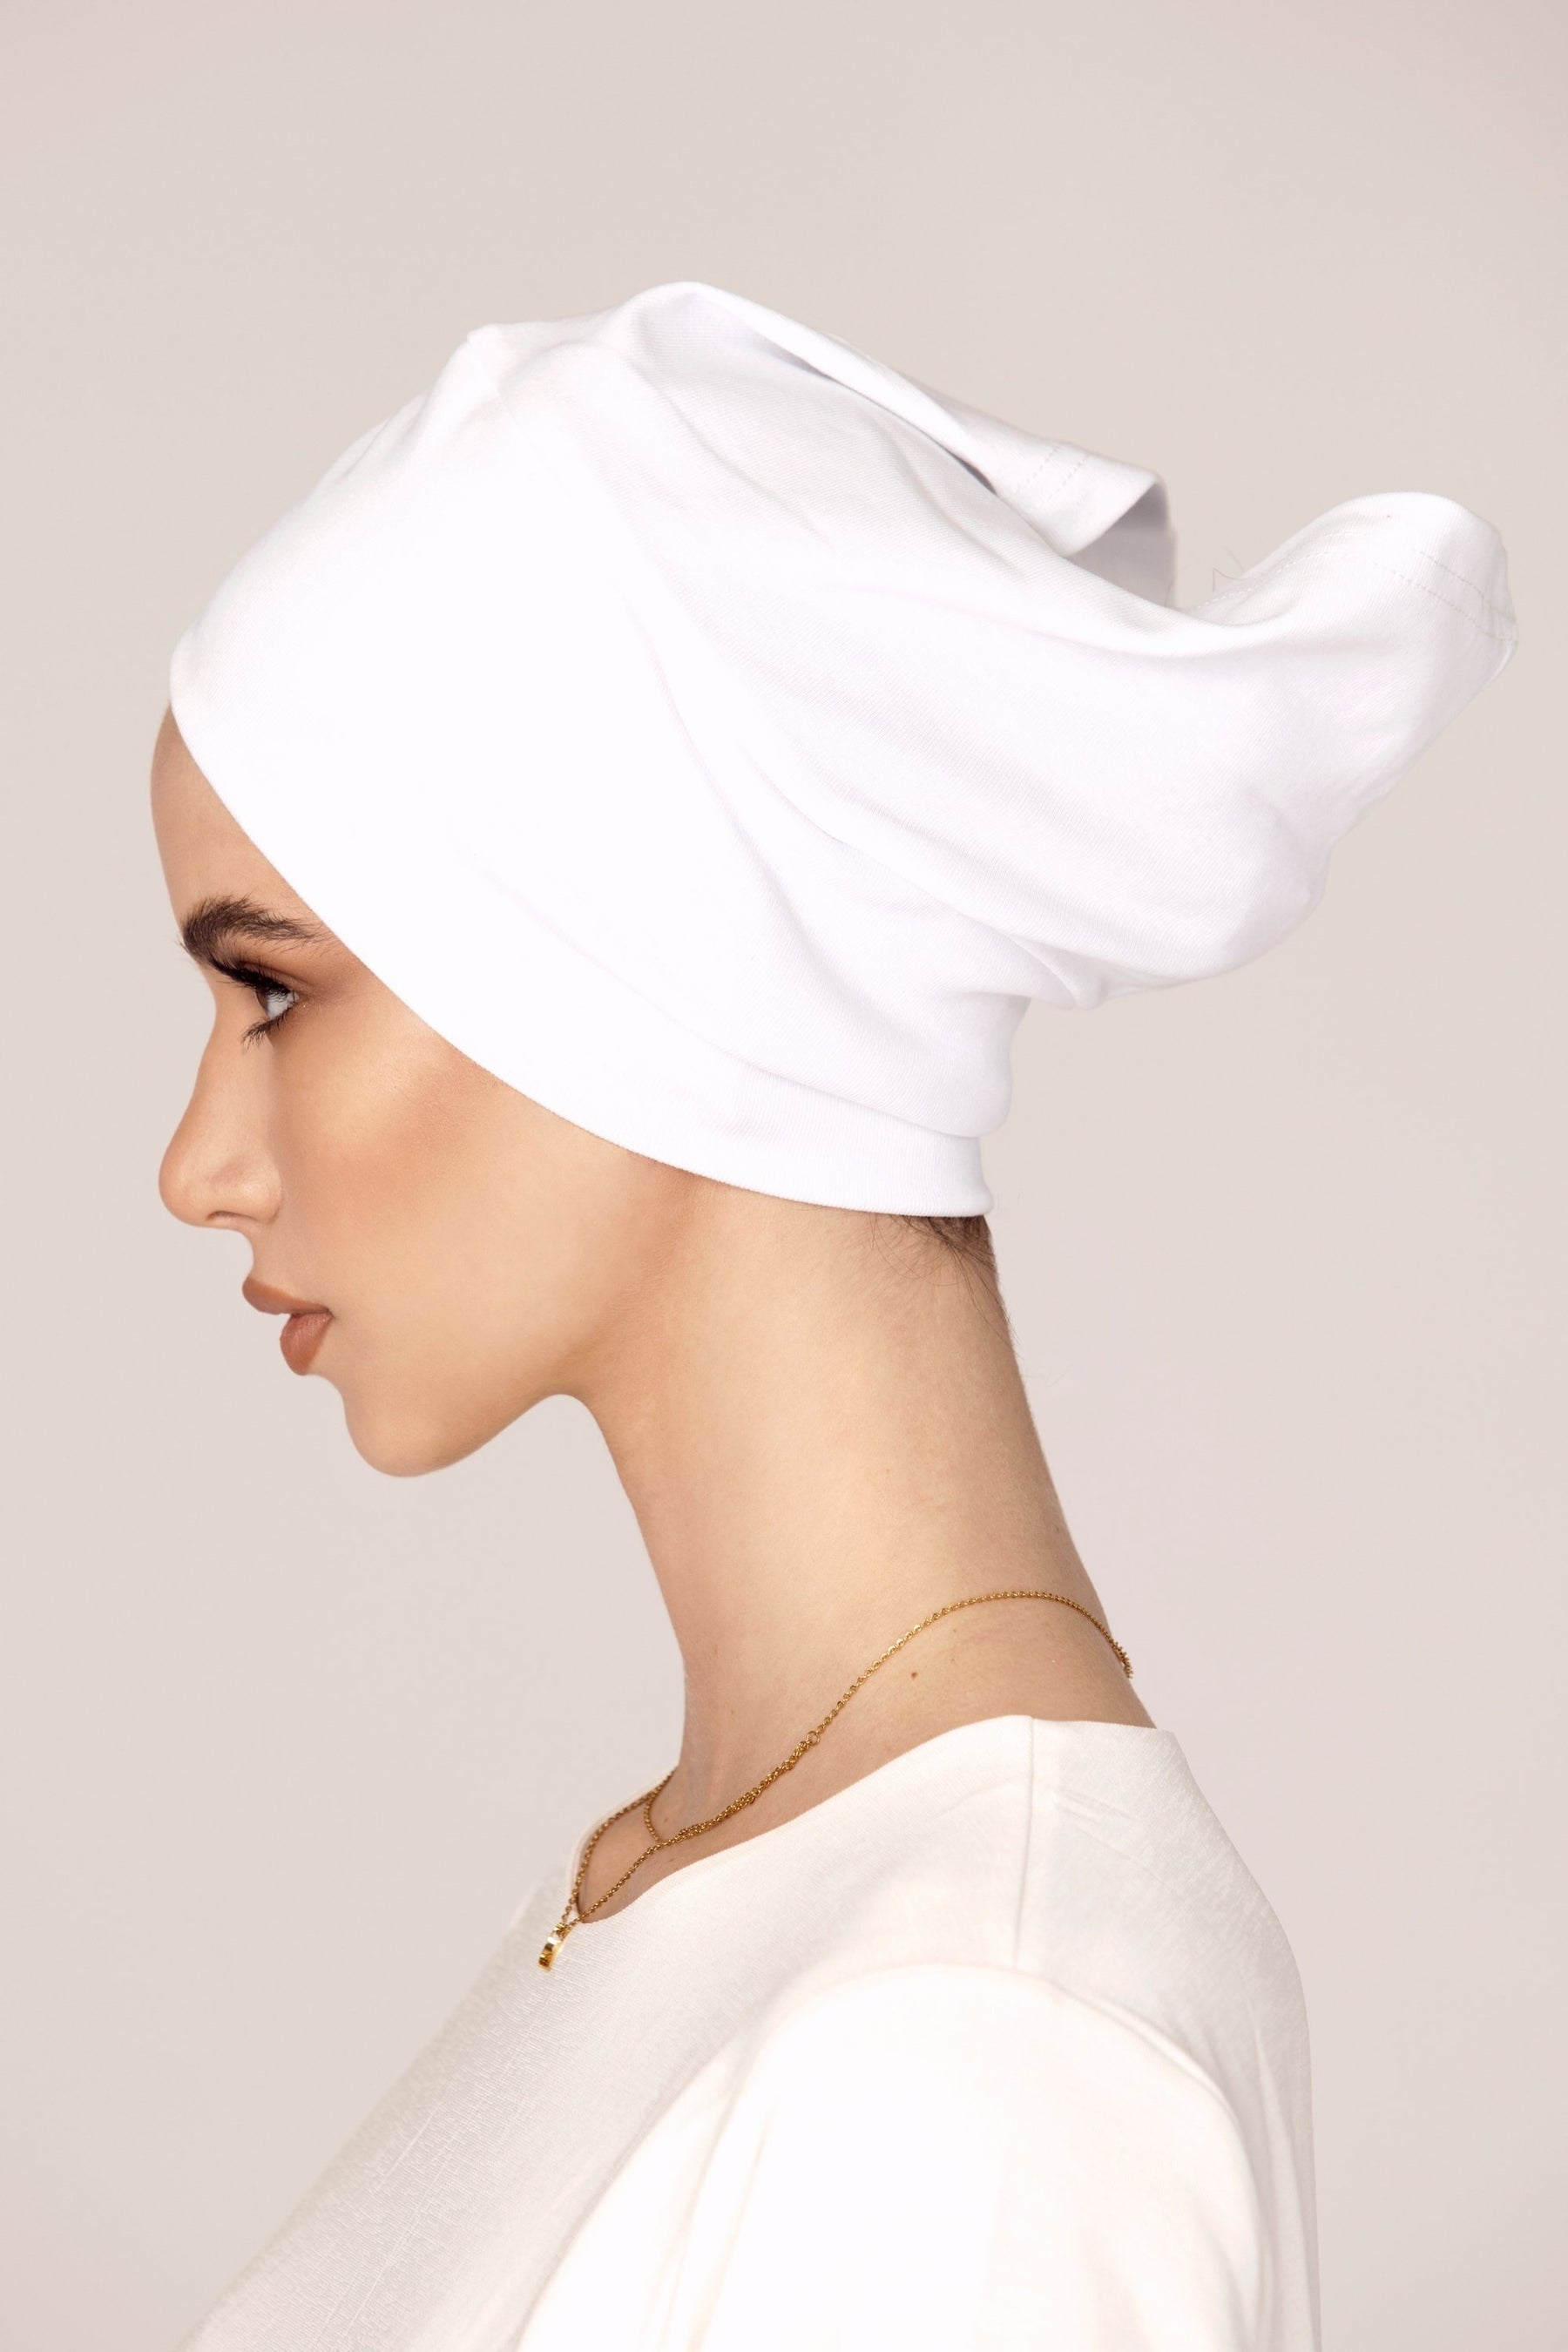 Veiled Collection Tie Back Undercap - White